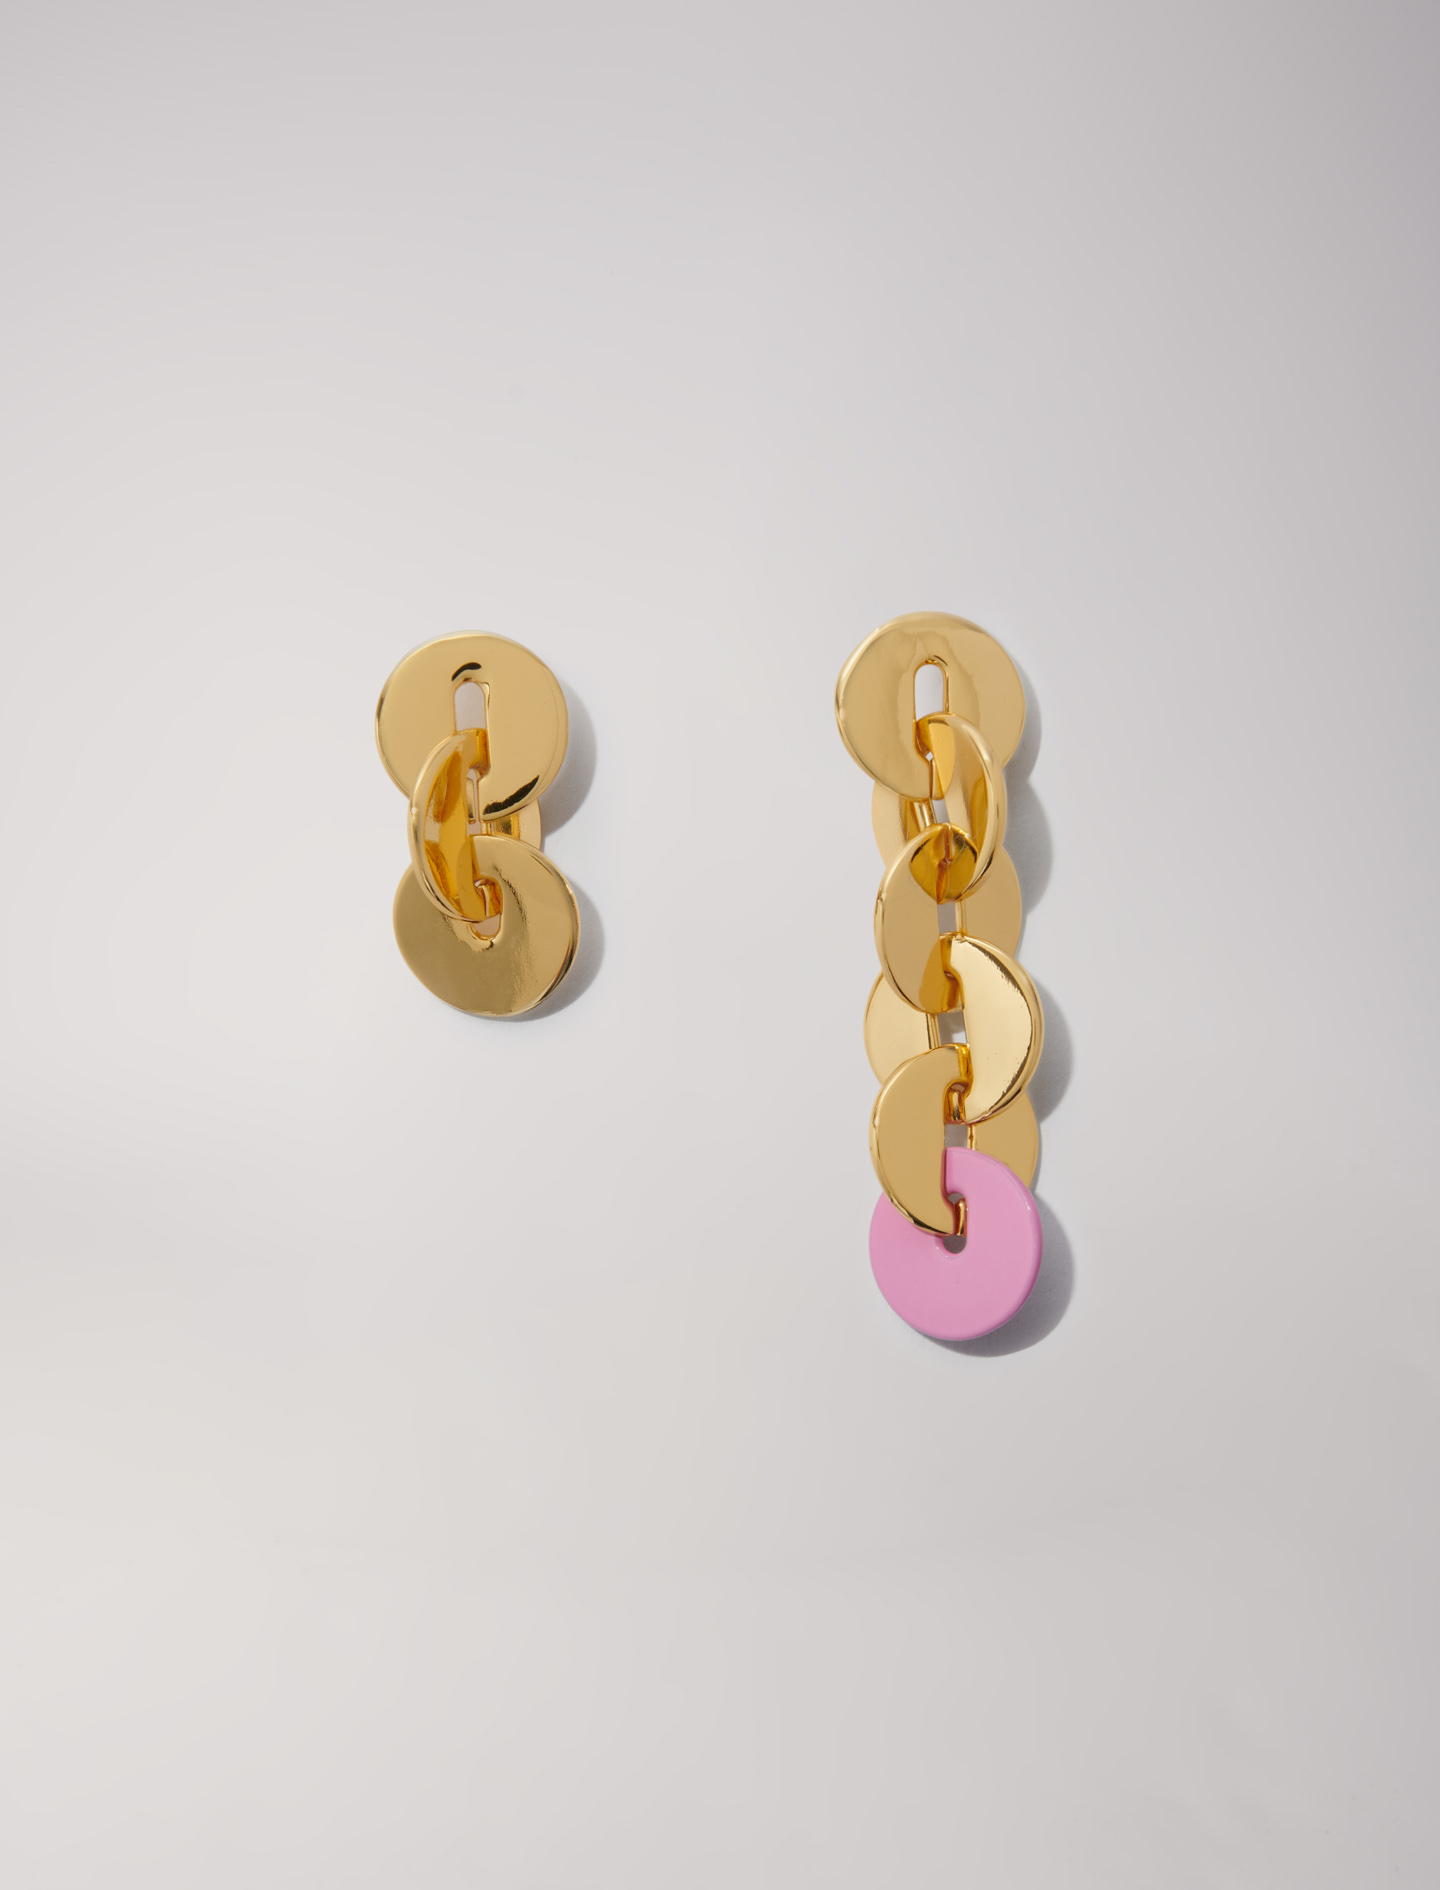 Mixte's resin Jewellery: Enameled earrings for Spring/Summer, size Mixte-Jewelry-OS (ONE SIZE), in color Gold / Yellow